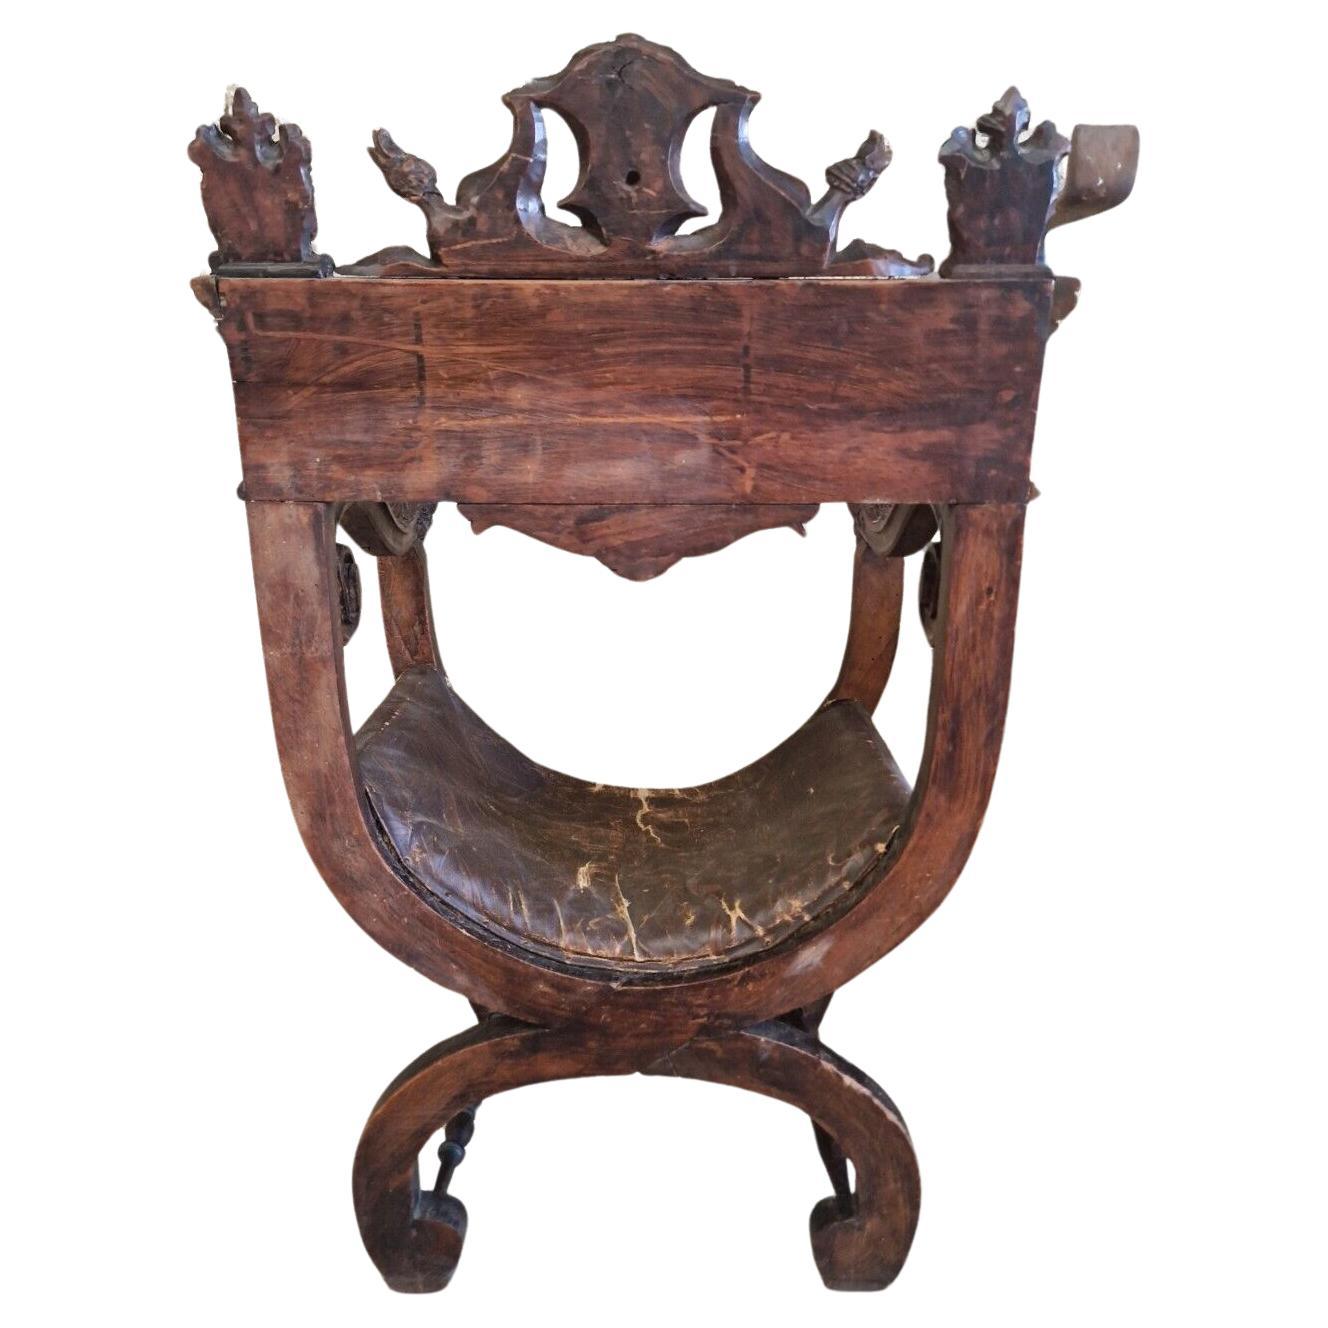 Fabulous French Dagobert Armchair in the Renaissance Style 

Hand carved Woodwork of Mythical Creatures, Circa Early 1800s.

Original Unrestored Condition, the seat leather is worn and loose. Showing an abundance of character and history.

Any